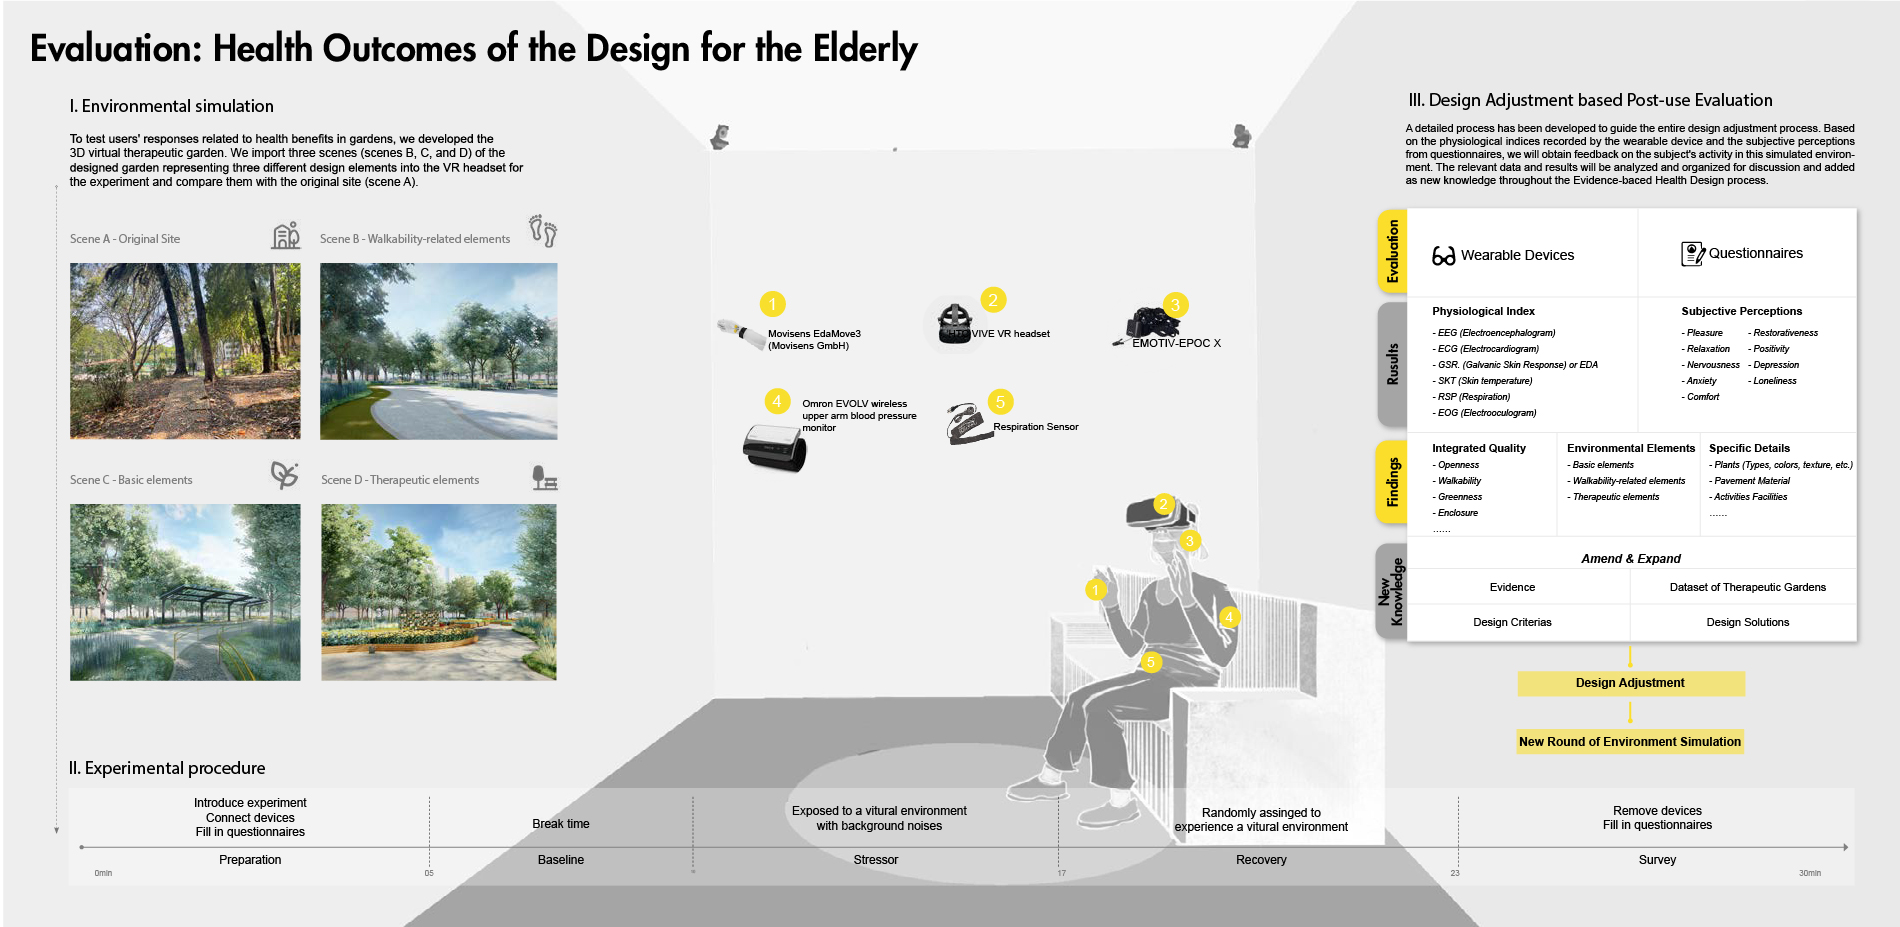 Evaluation: Health Outcomes of the Design for the Elderly